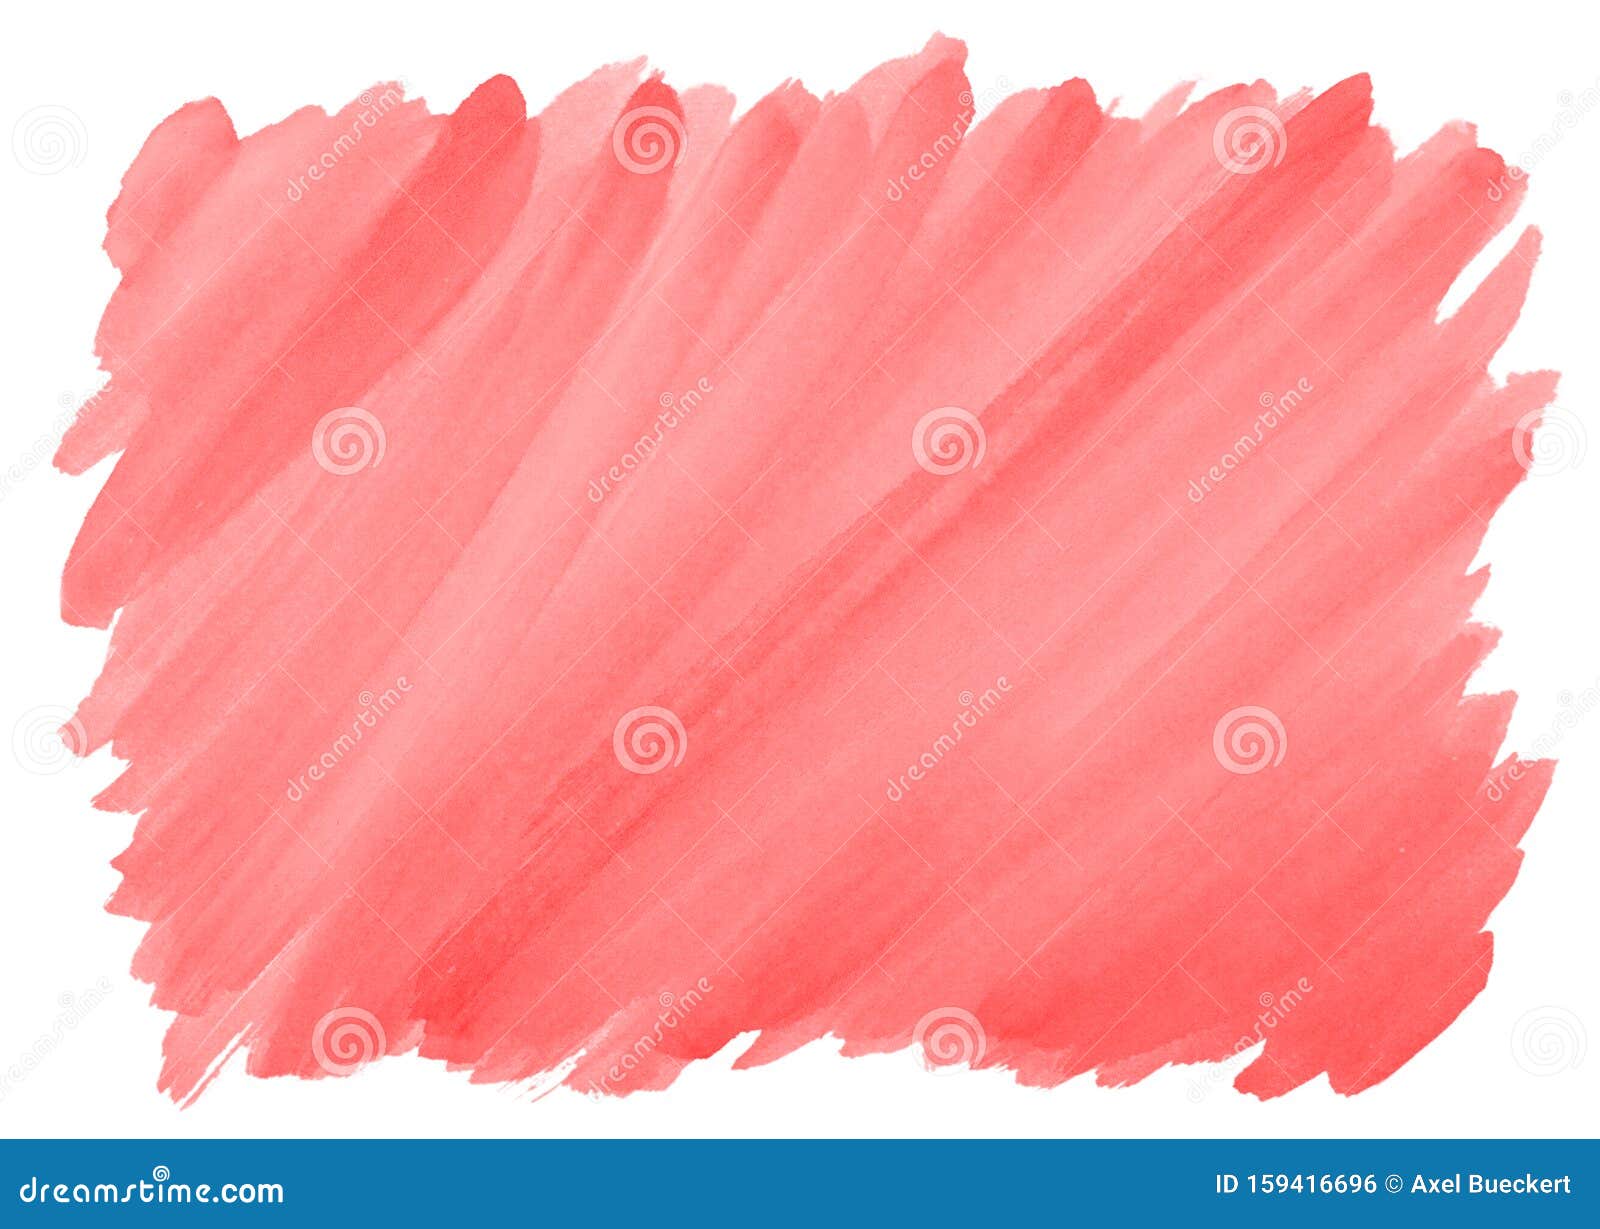 Red Watercolor Background with Rough Edges Stock Photo - Image of rough ...